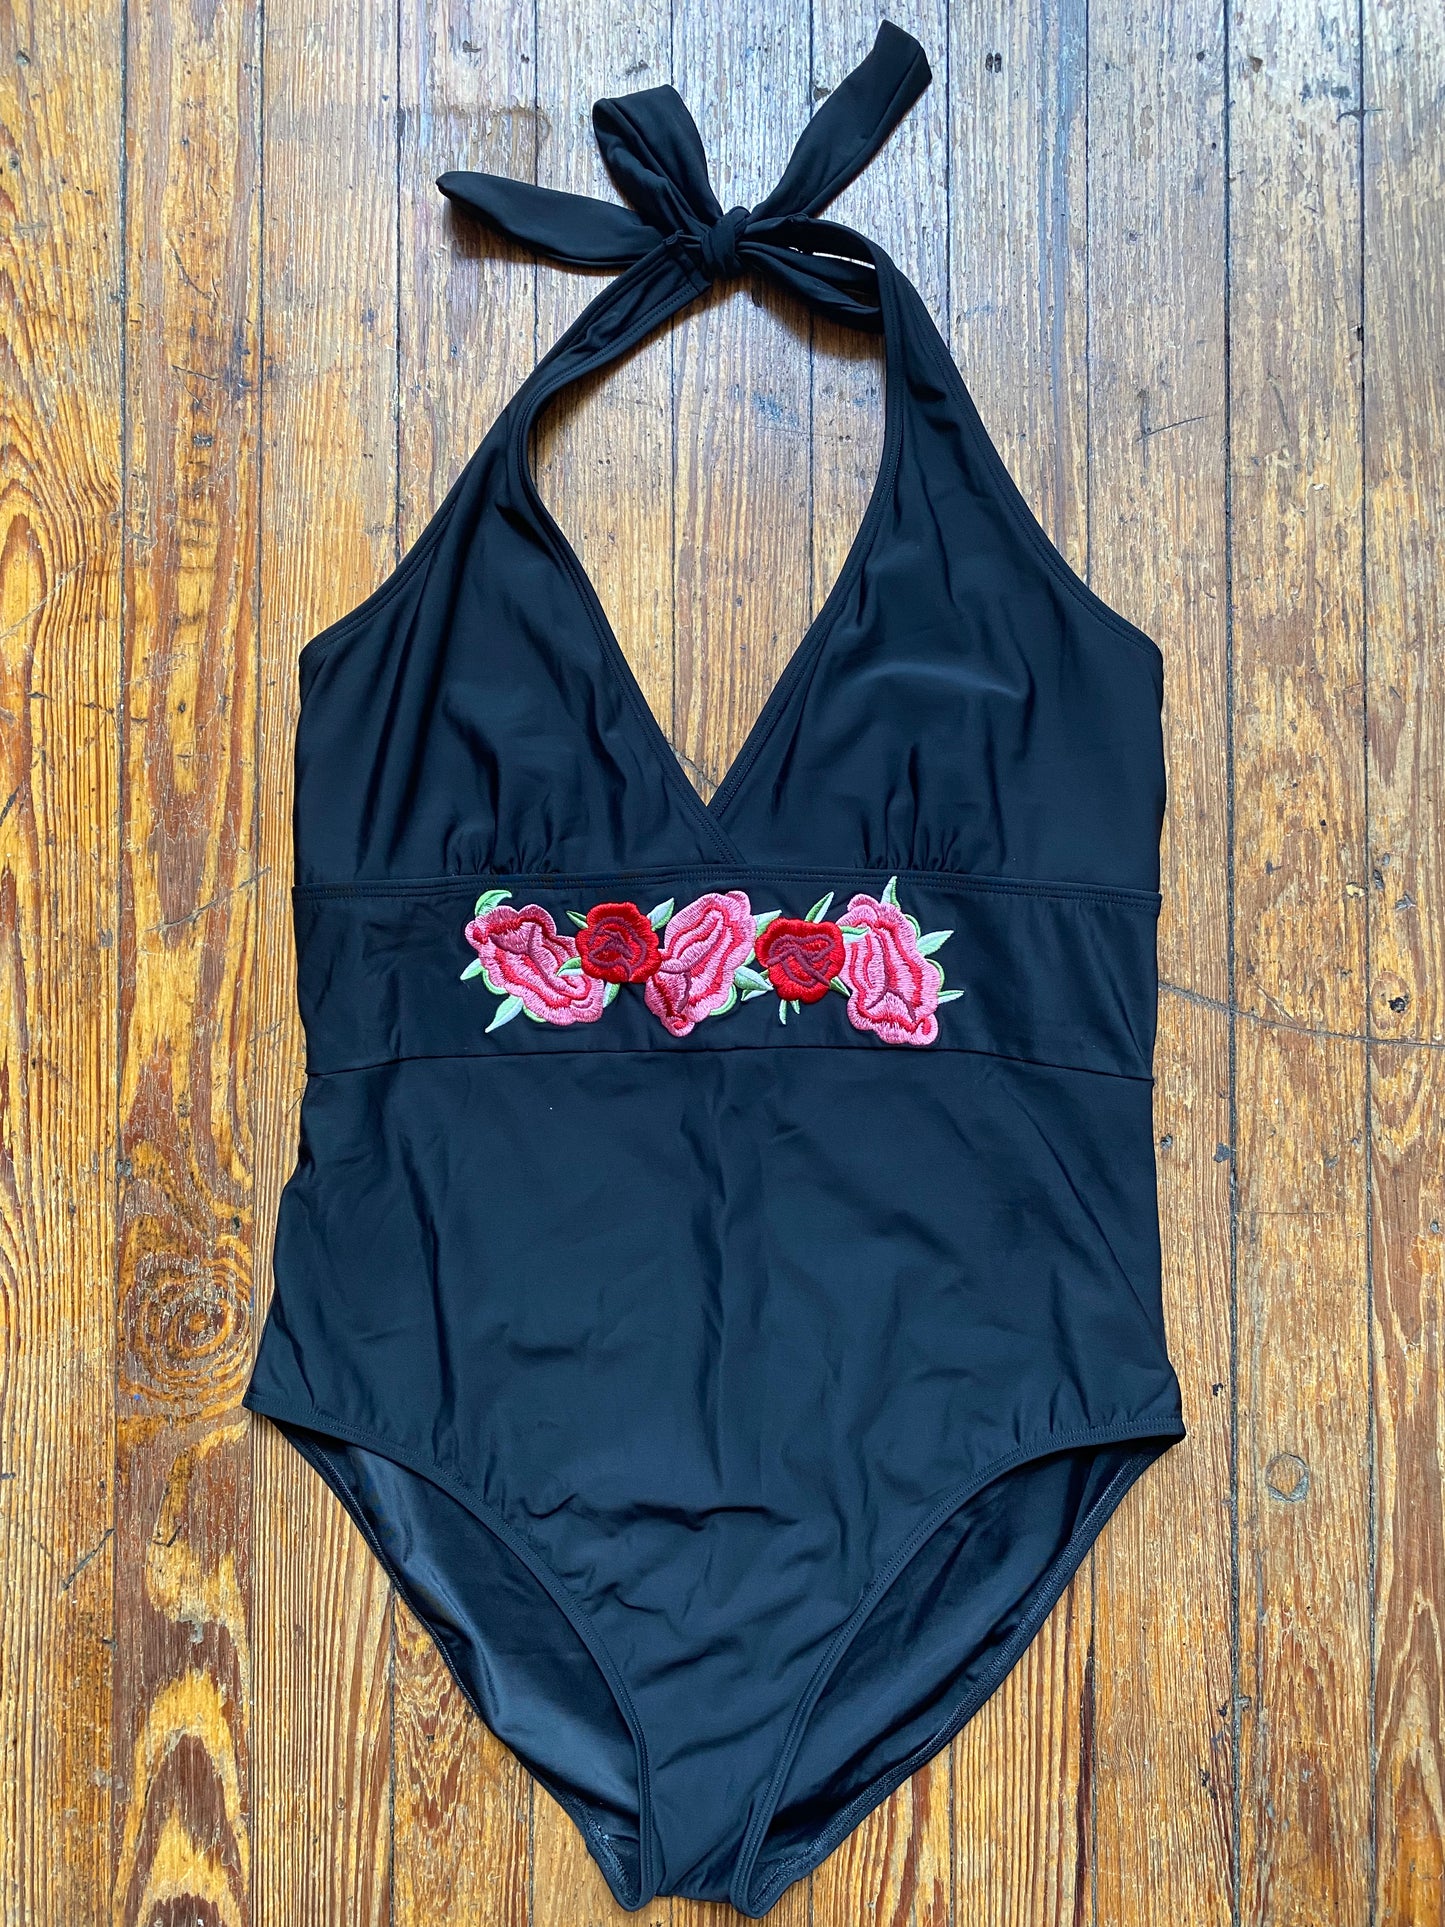 Black w/ Floral Embroidery One Piece Halter Swimsuit